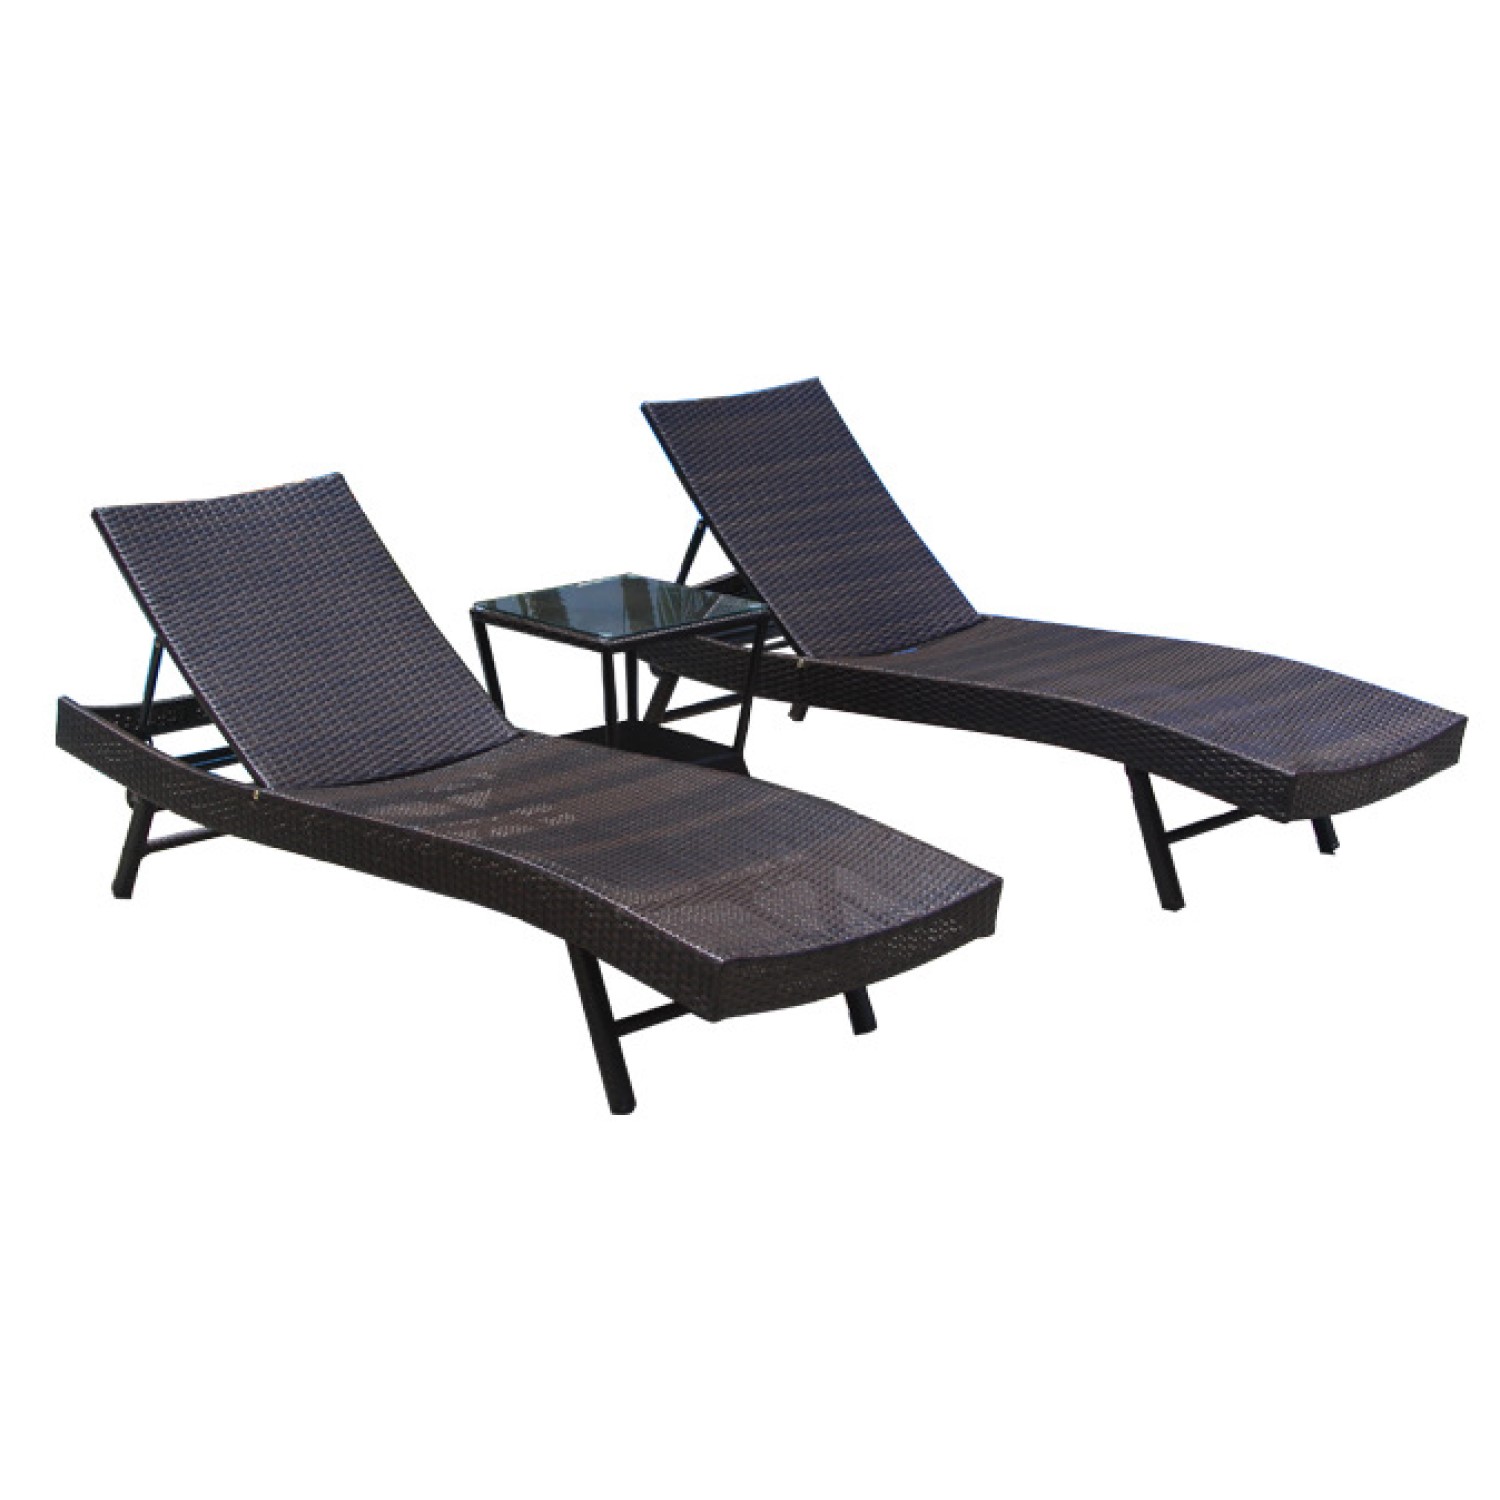 PE Rattan Outdoor Sunlounges Garden Patio Swimming Pool Sun Lounger TY014